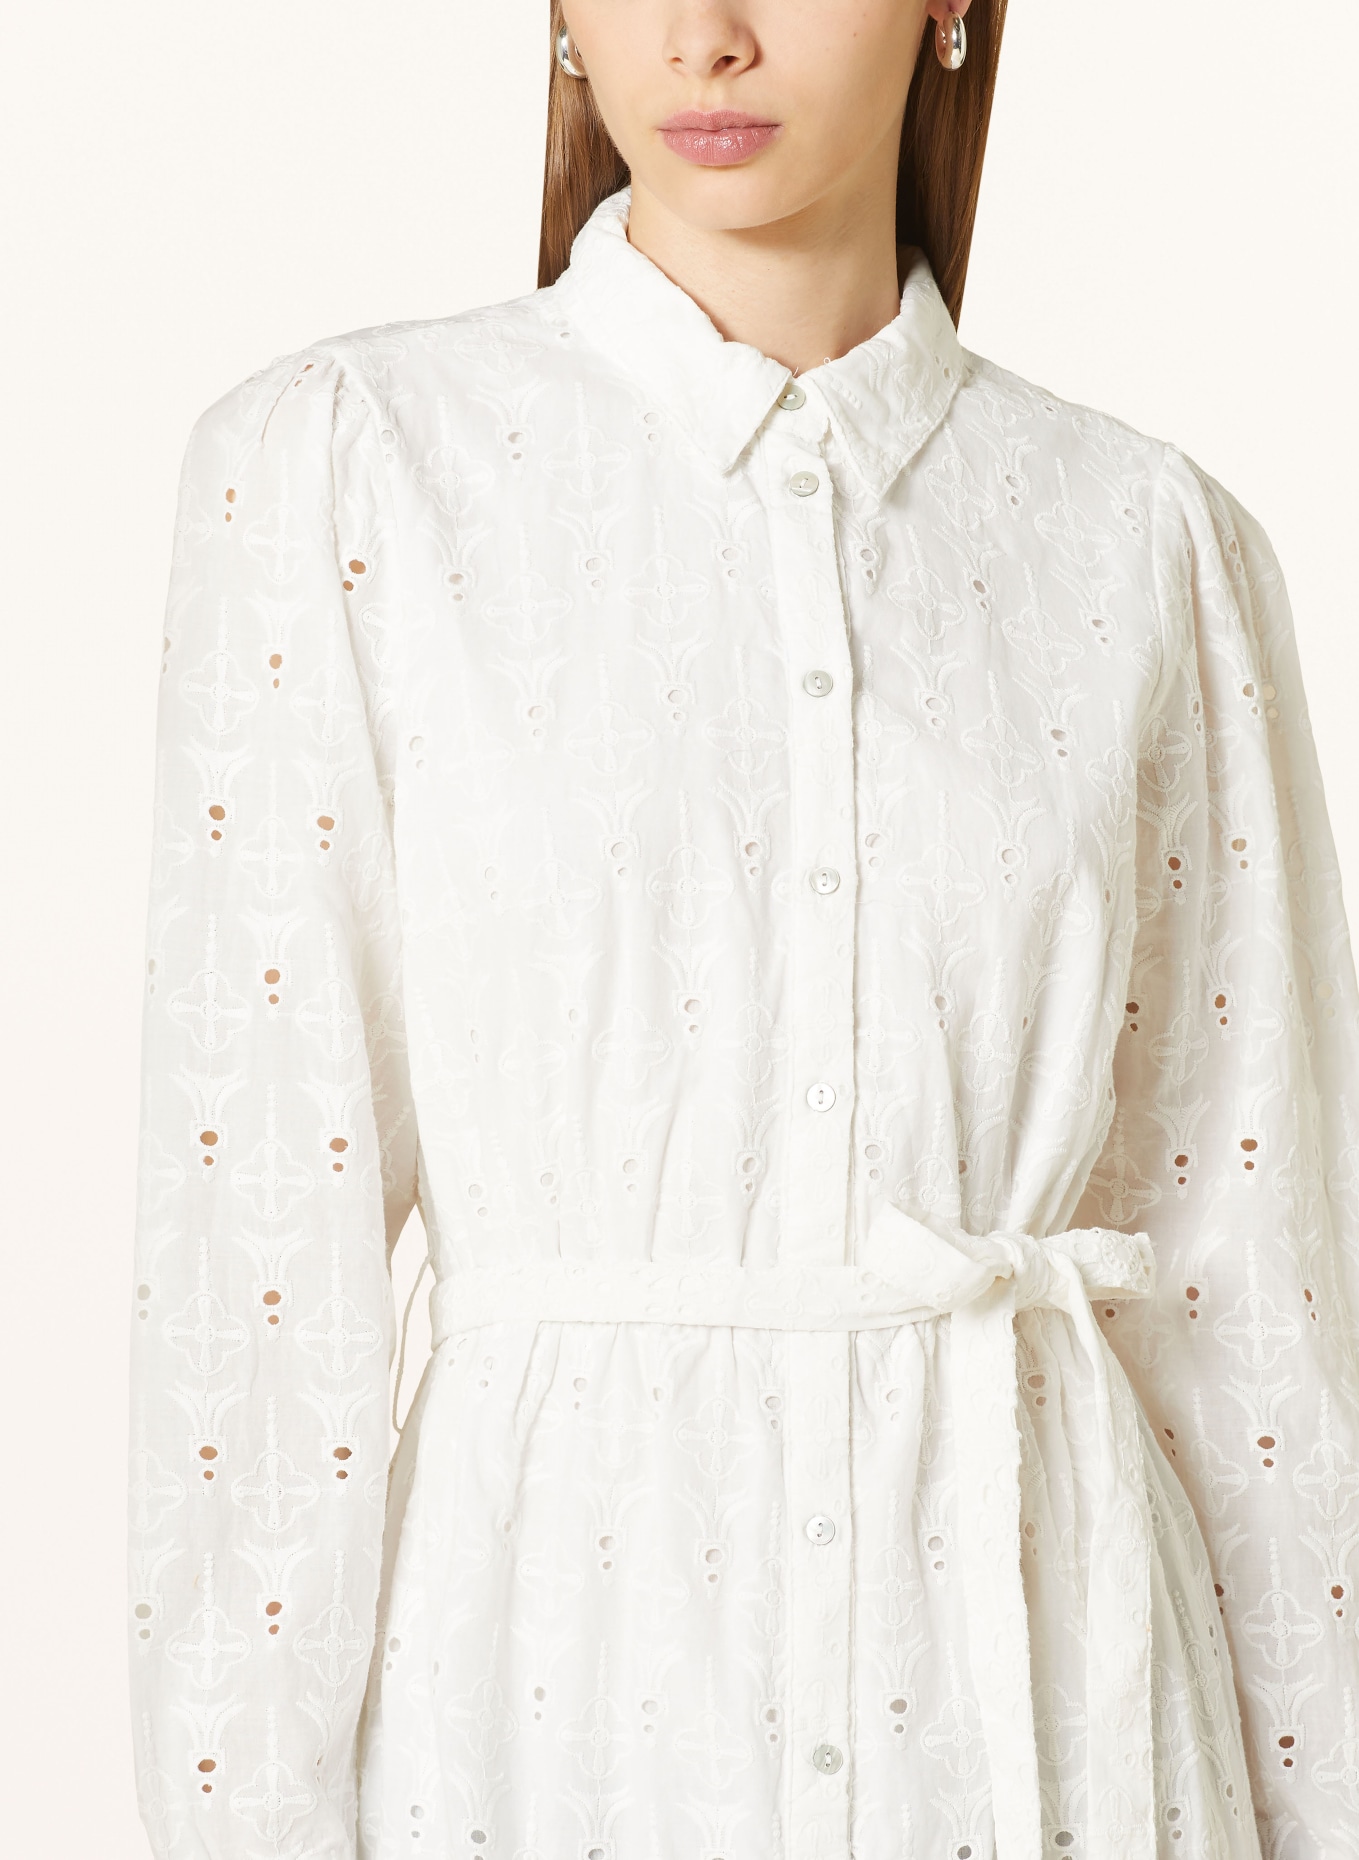 ROUGE VILA Shirt dress made of lace, Color: WHITE (Image 4)